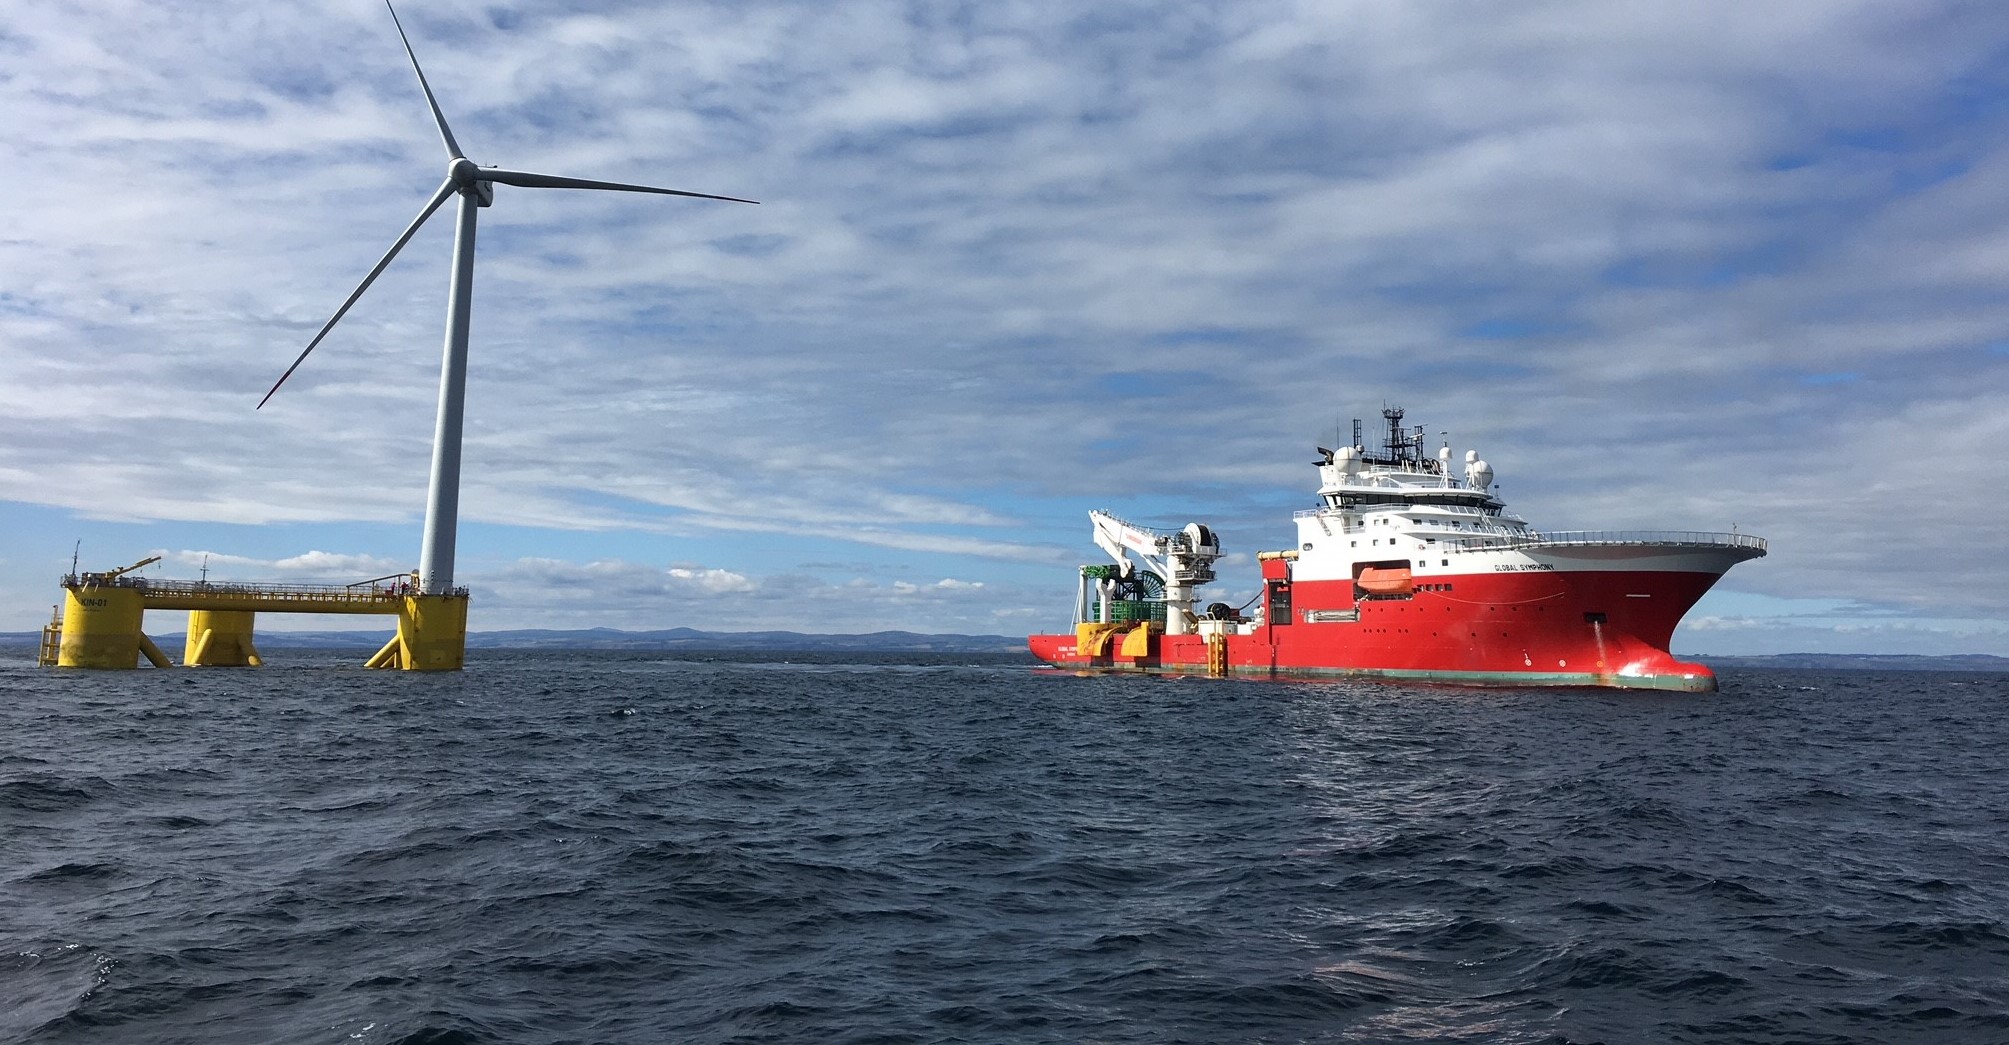 A vessel next to a floating wind turbine